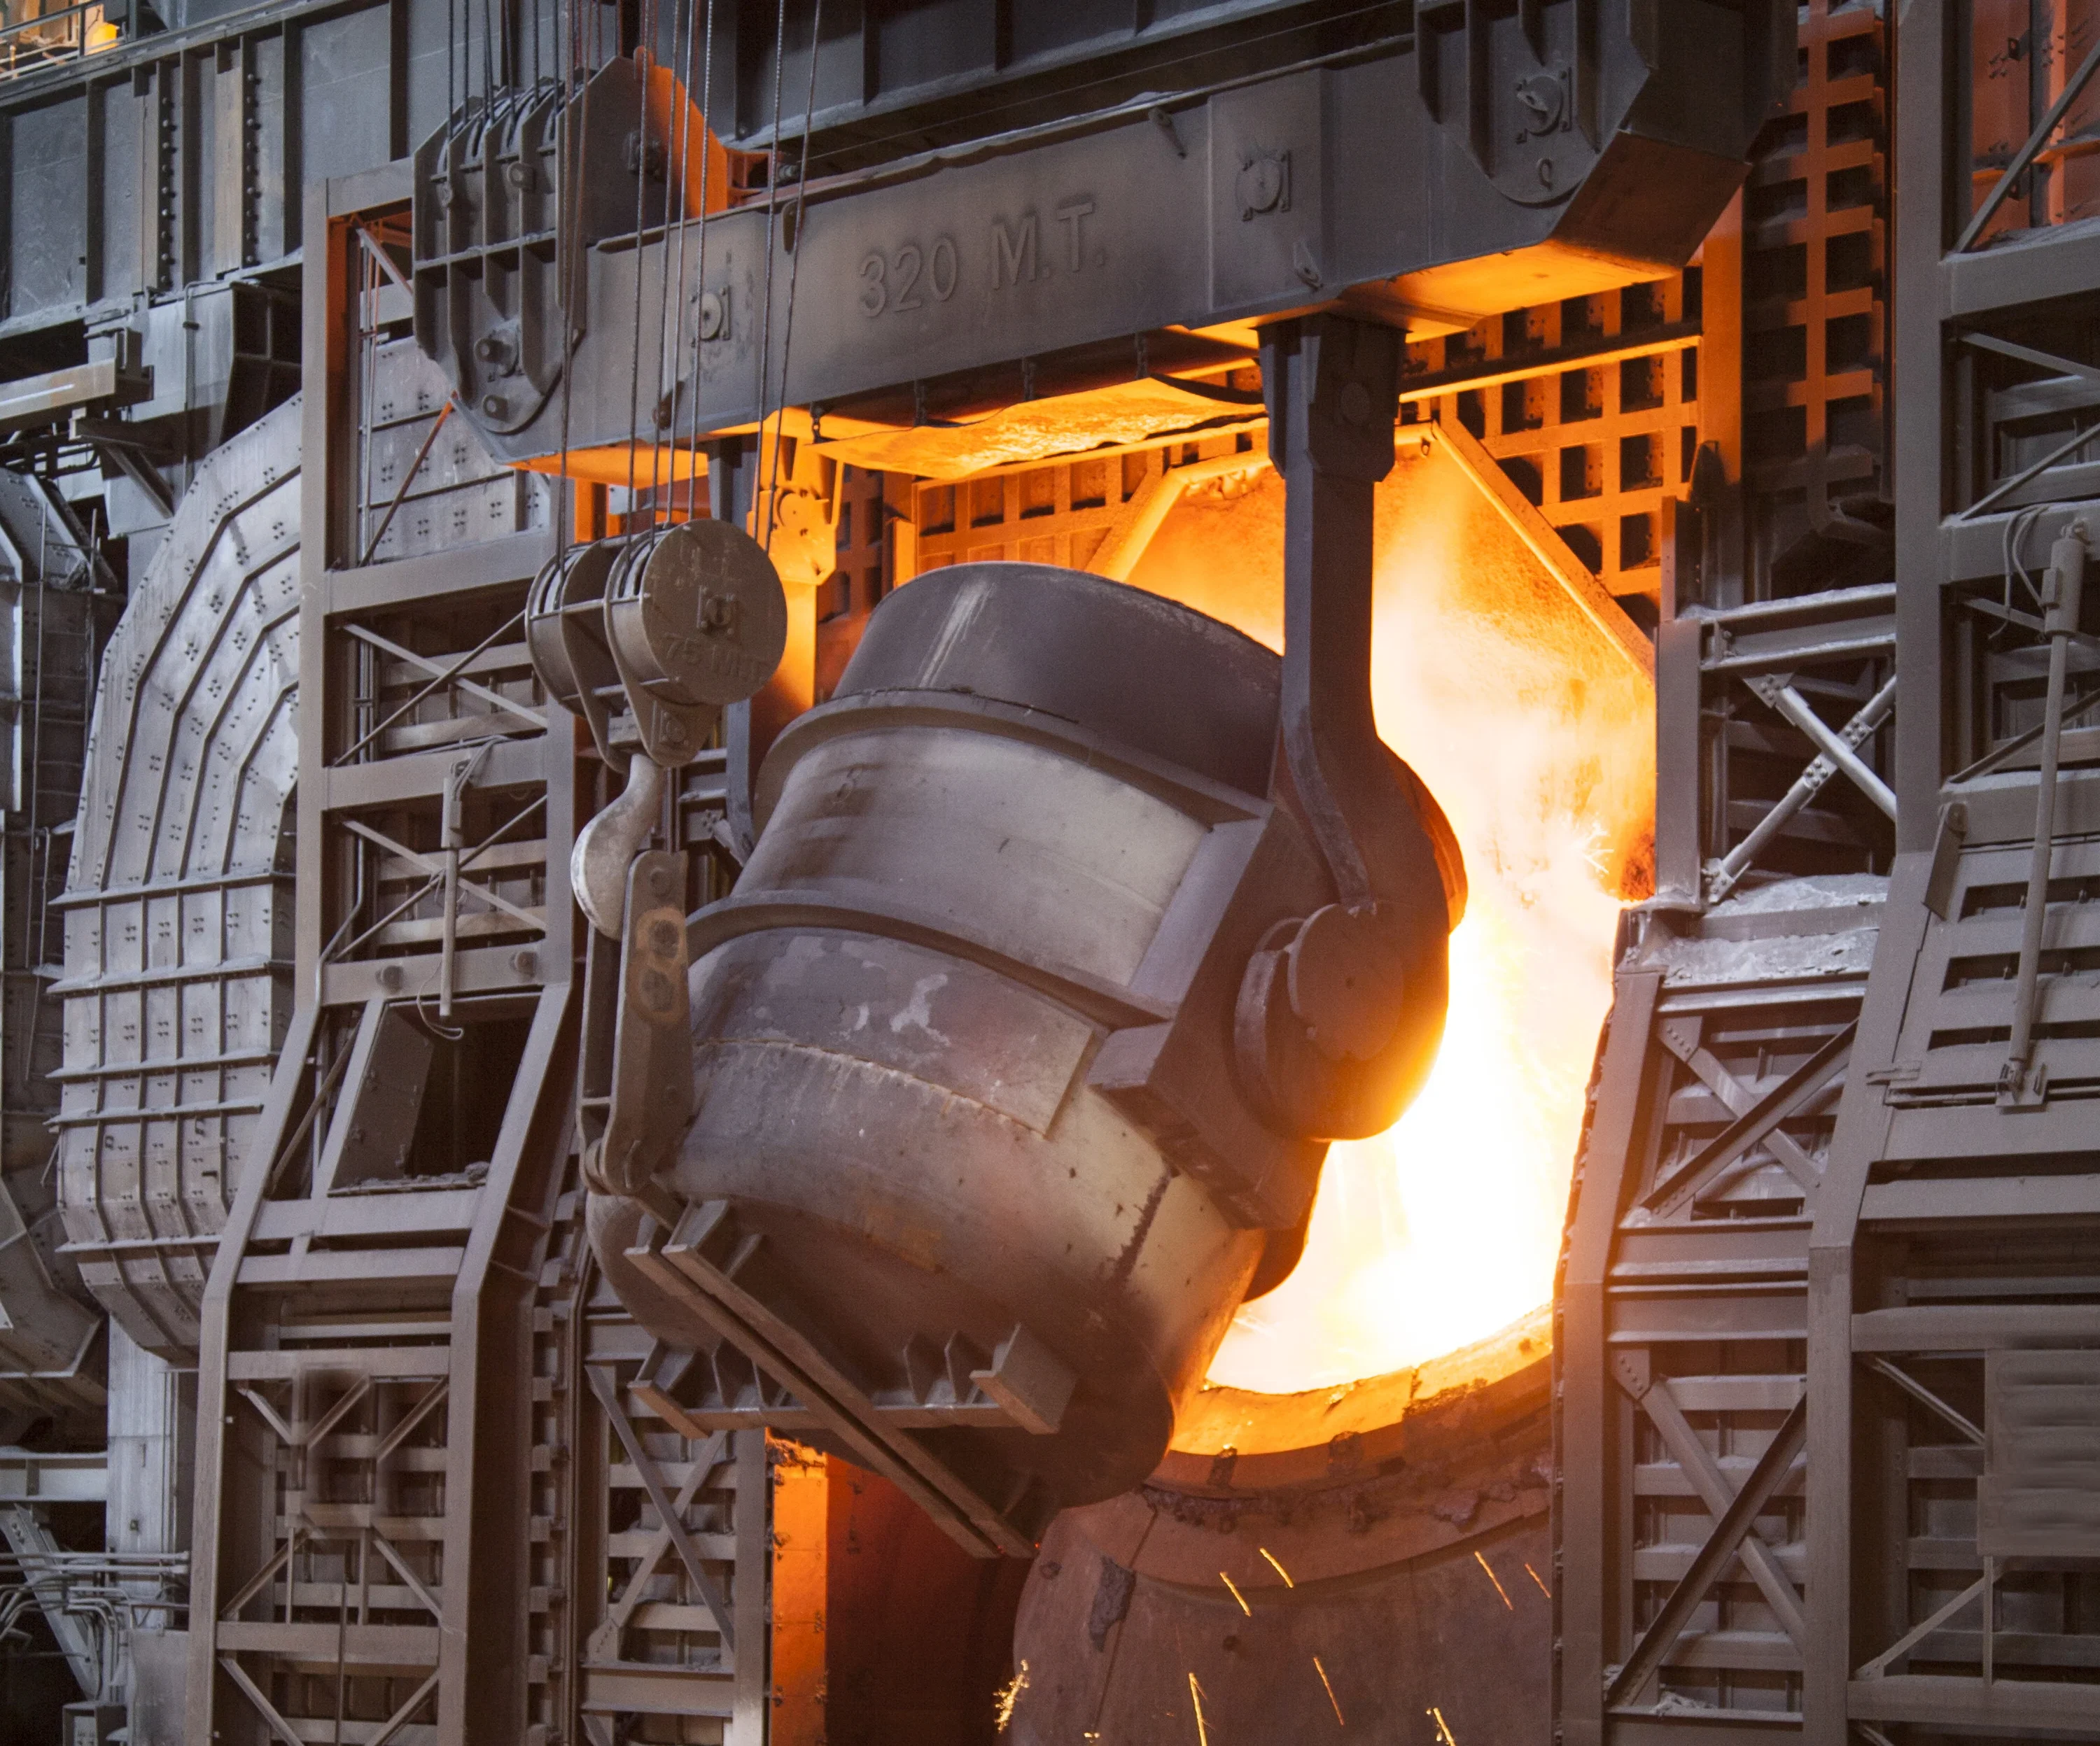 This image highlights the significance of valve performance in the steel industry. Proper valve operation ensures control, safety, and productivity for high-quality steel production